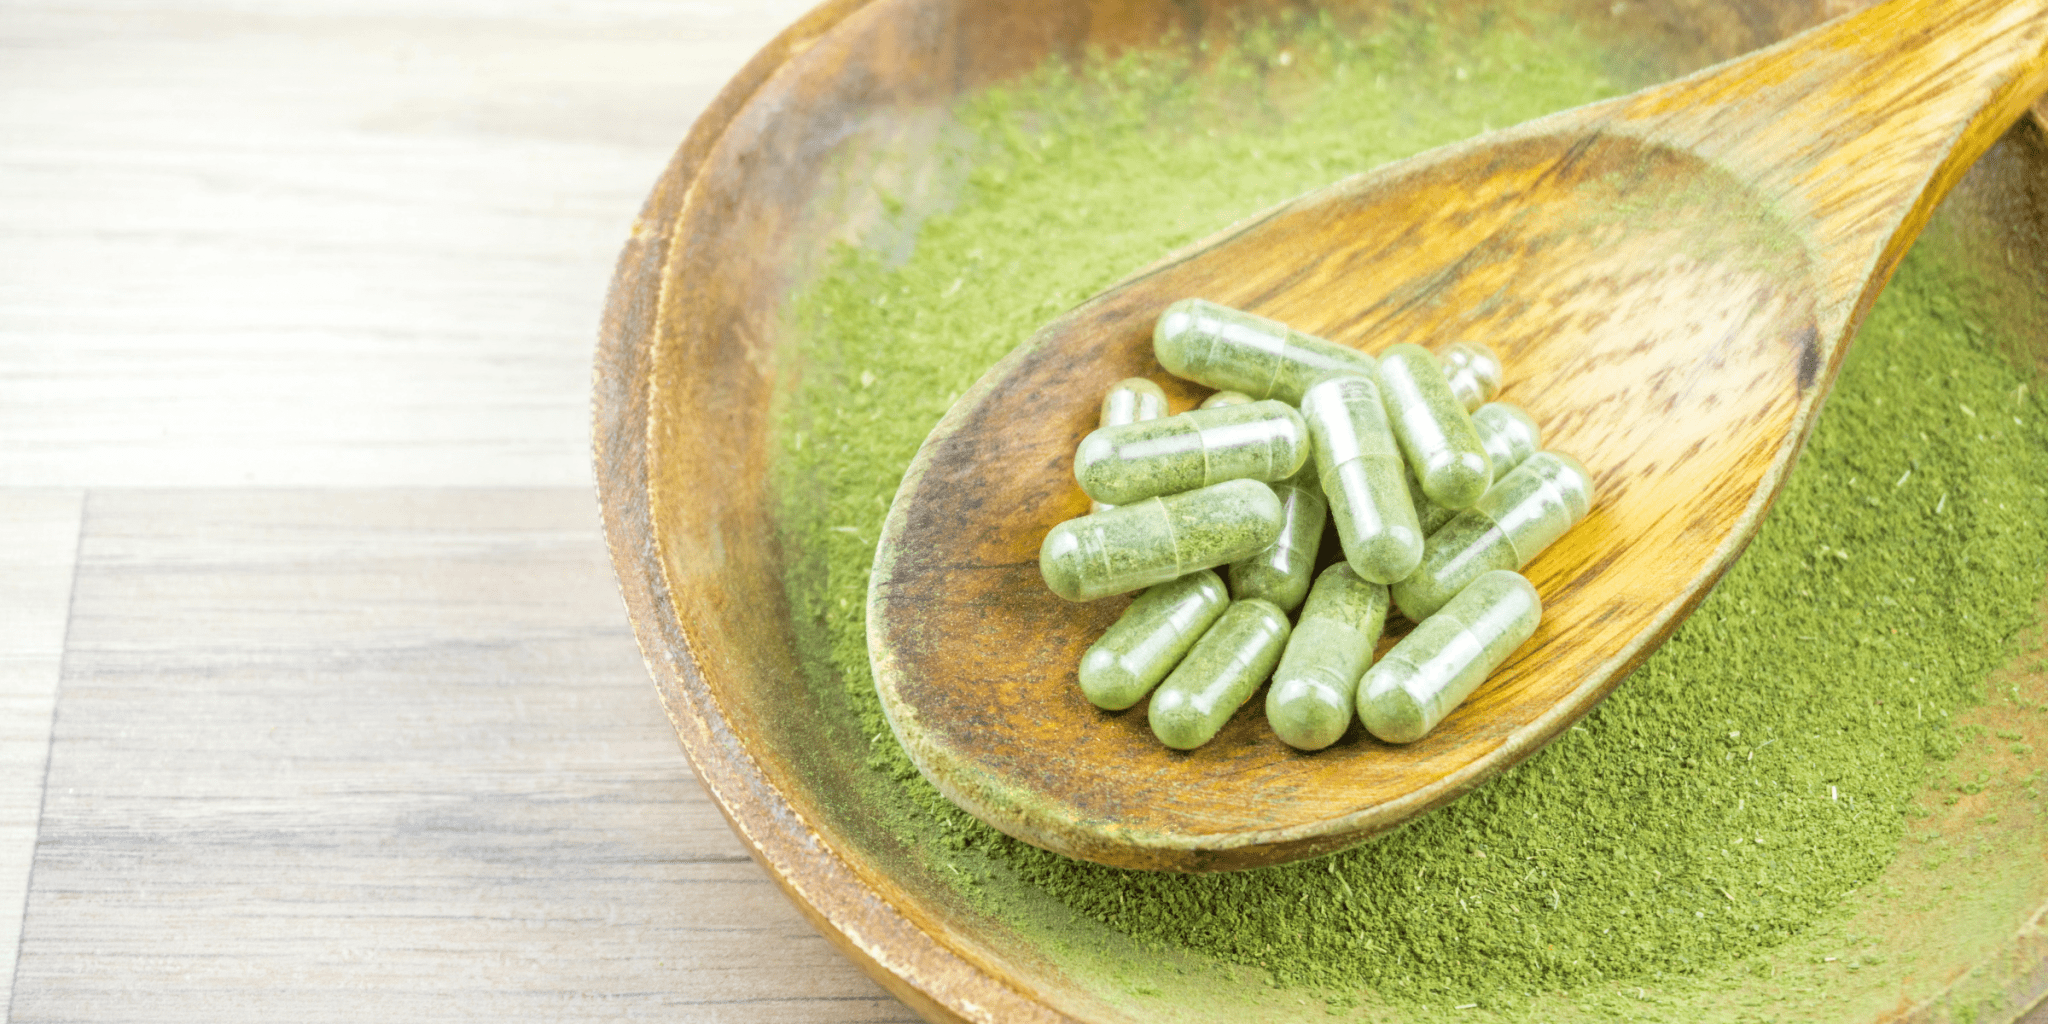 kratom pills and kratom powder can help ease addiction and withdrawal symptoms